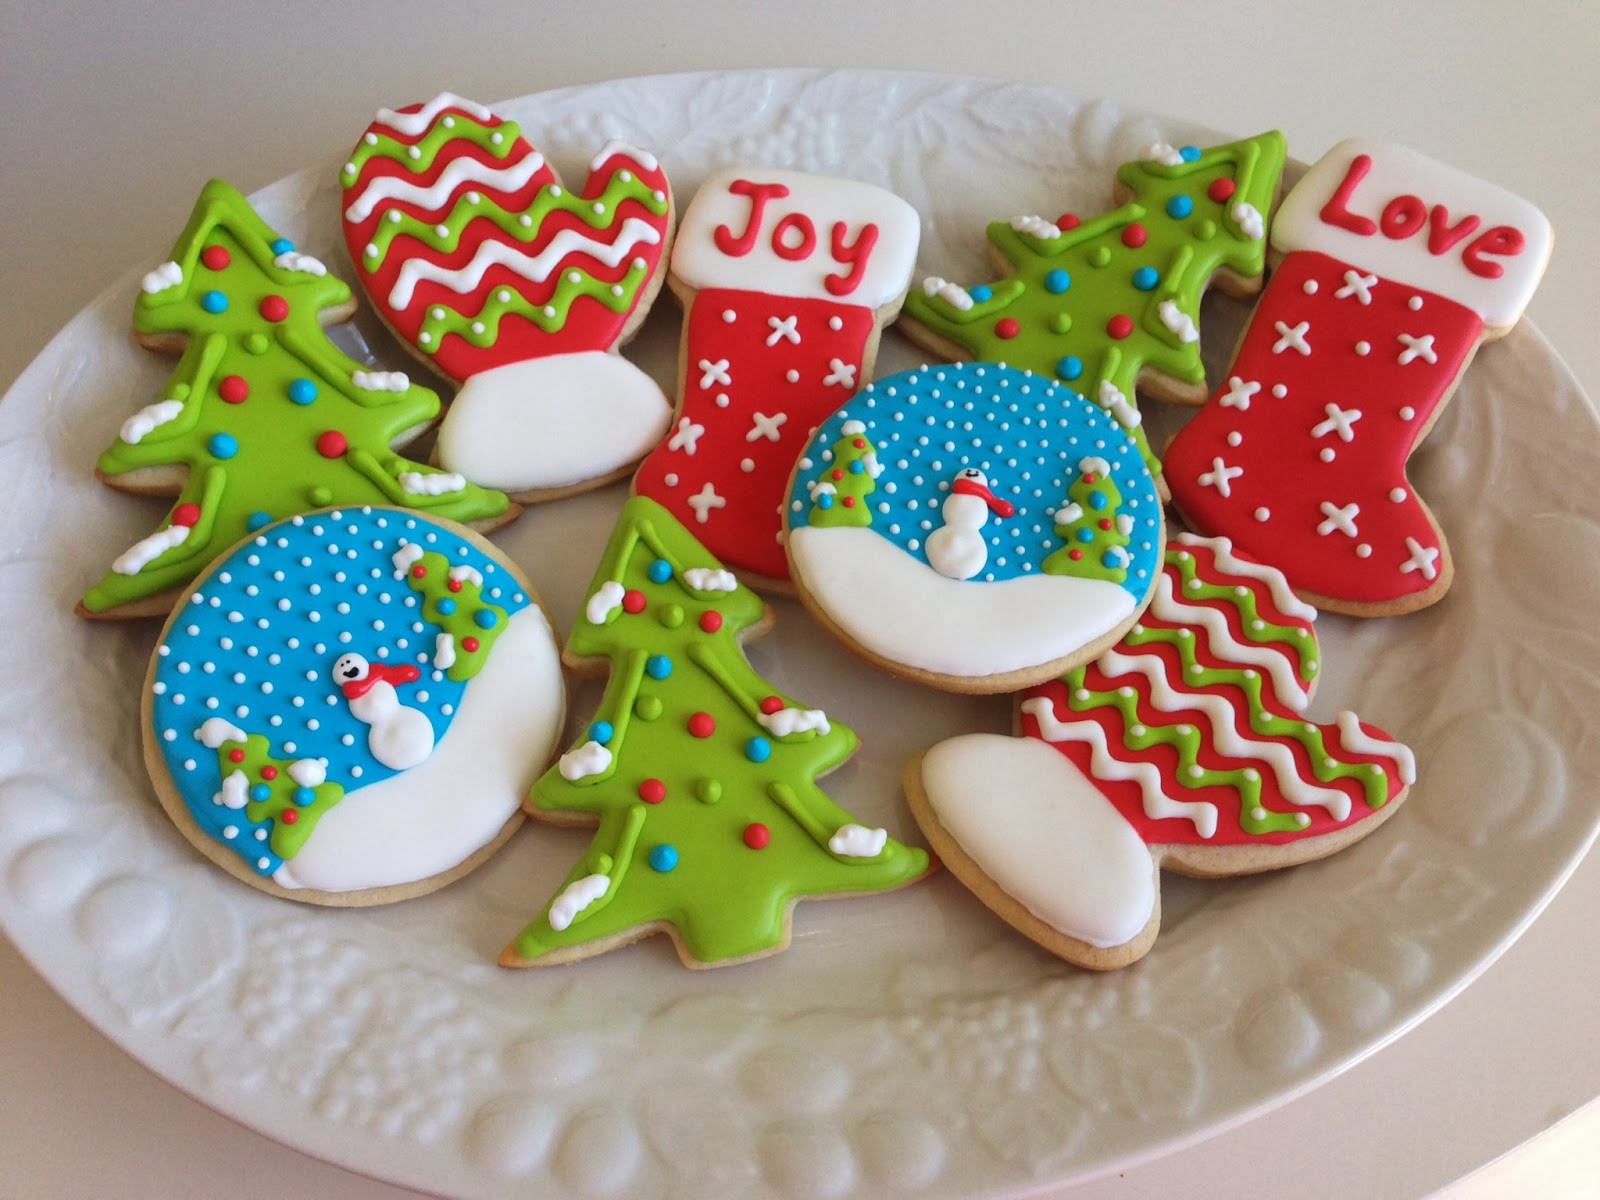 Christmas Cut Out Cookies
 monograms & cake Christmas Cut Out Sugar Cookies with